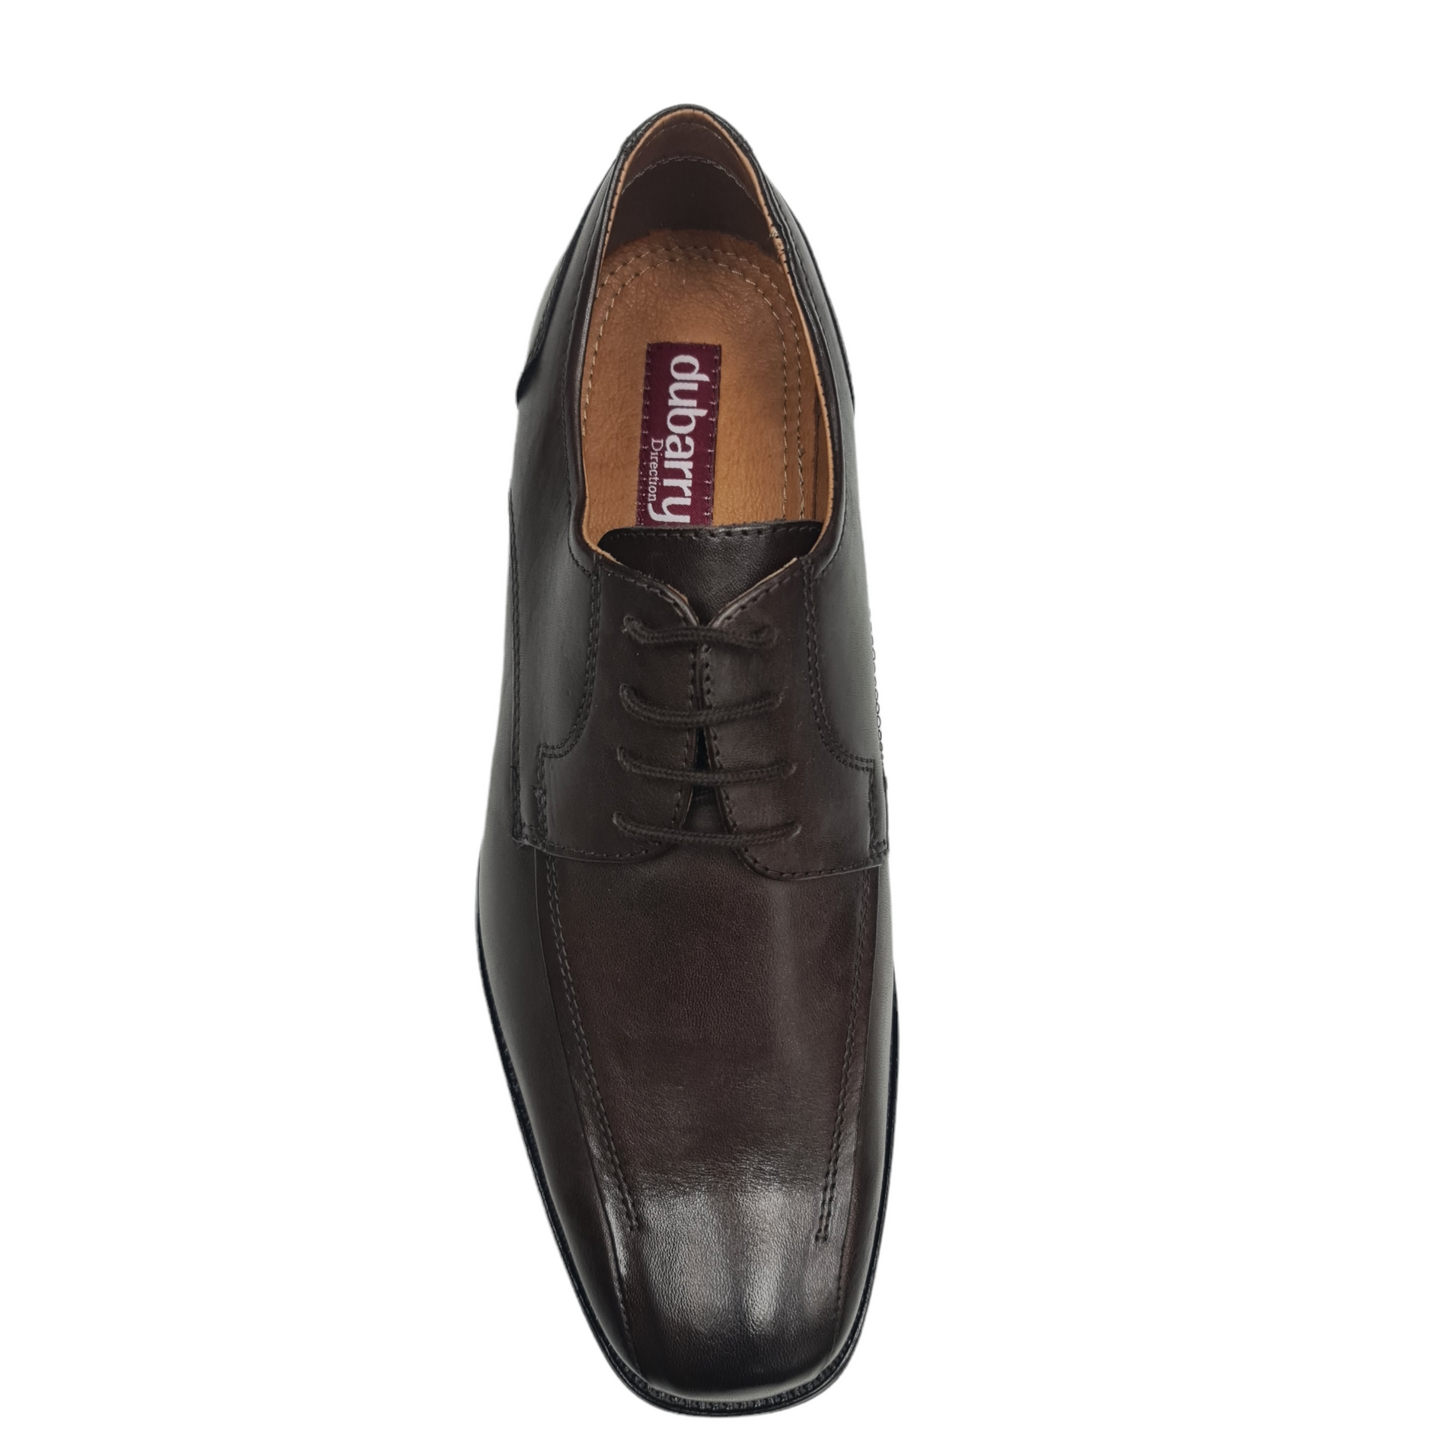 Dubarry Davey Brown Formal Shoes